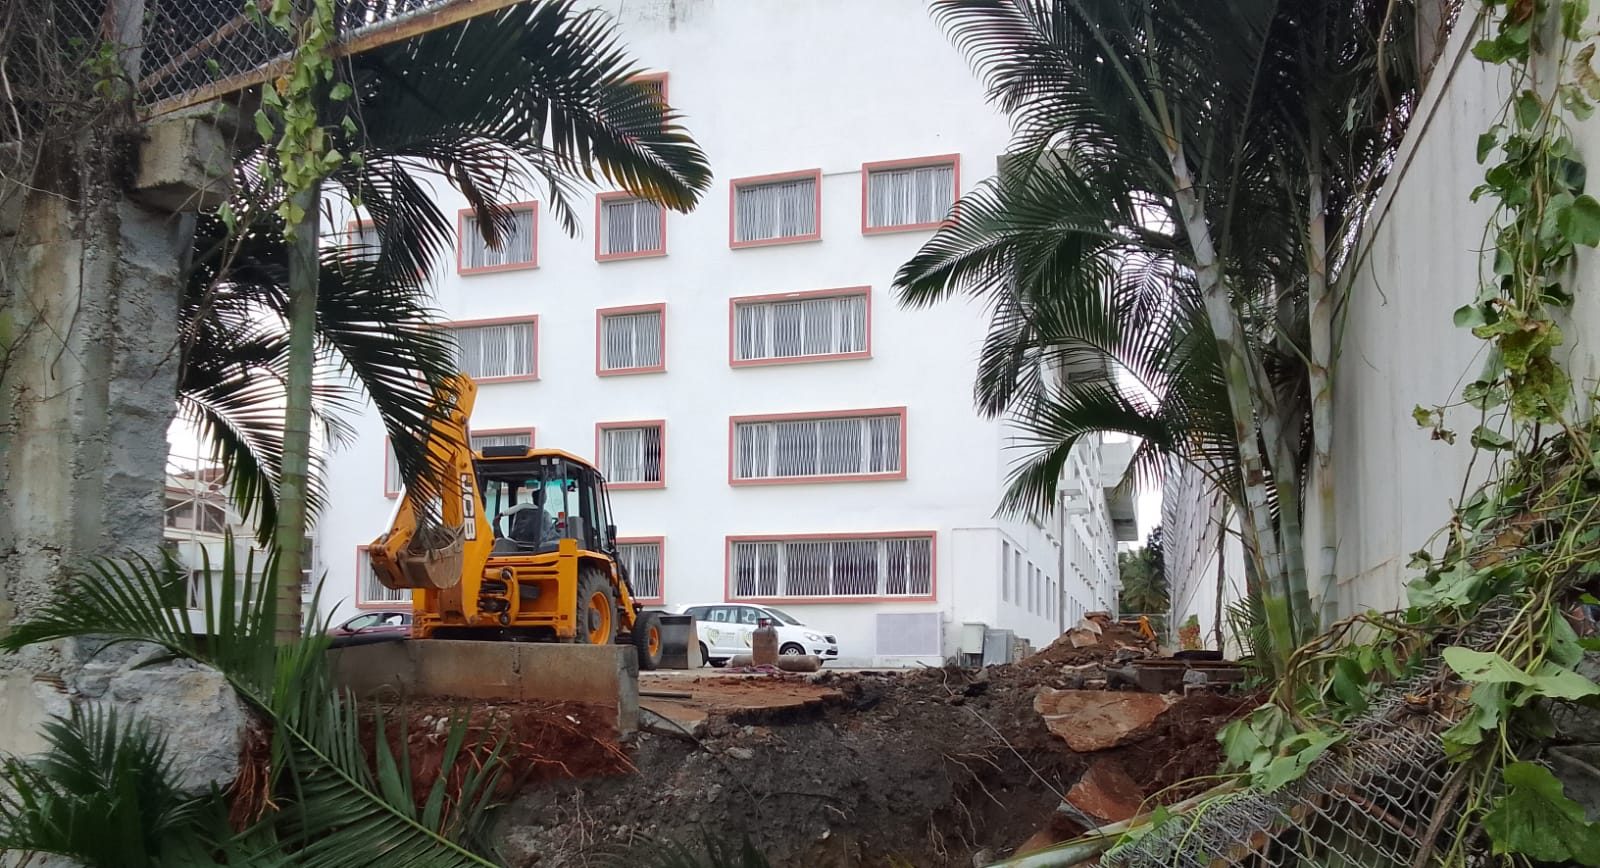 BBMP bulldozes encroachment by Bengaluru school owned by Congress MLA